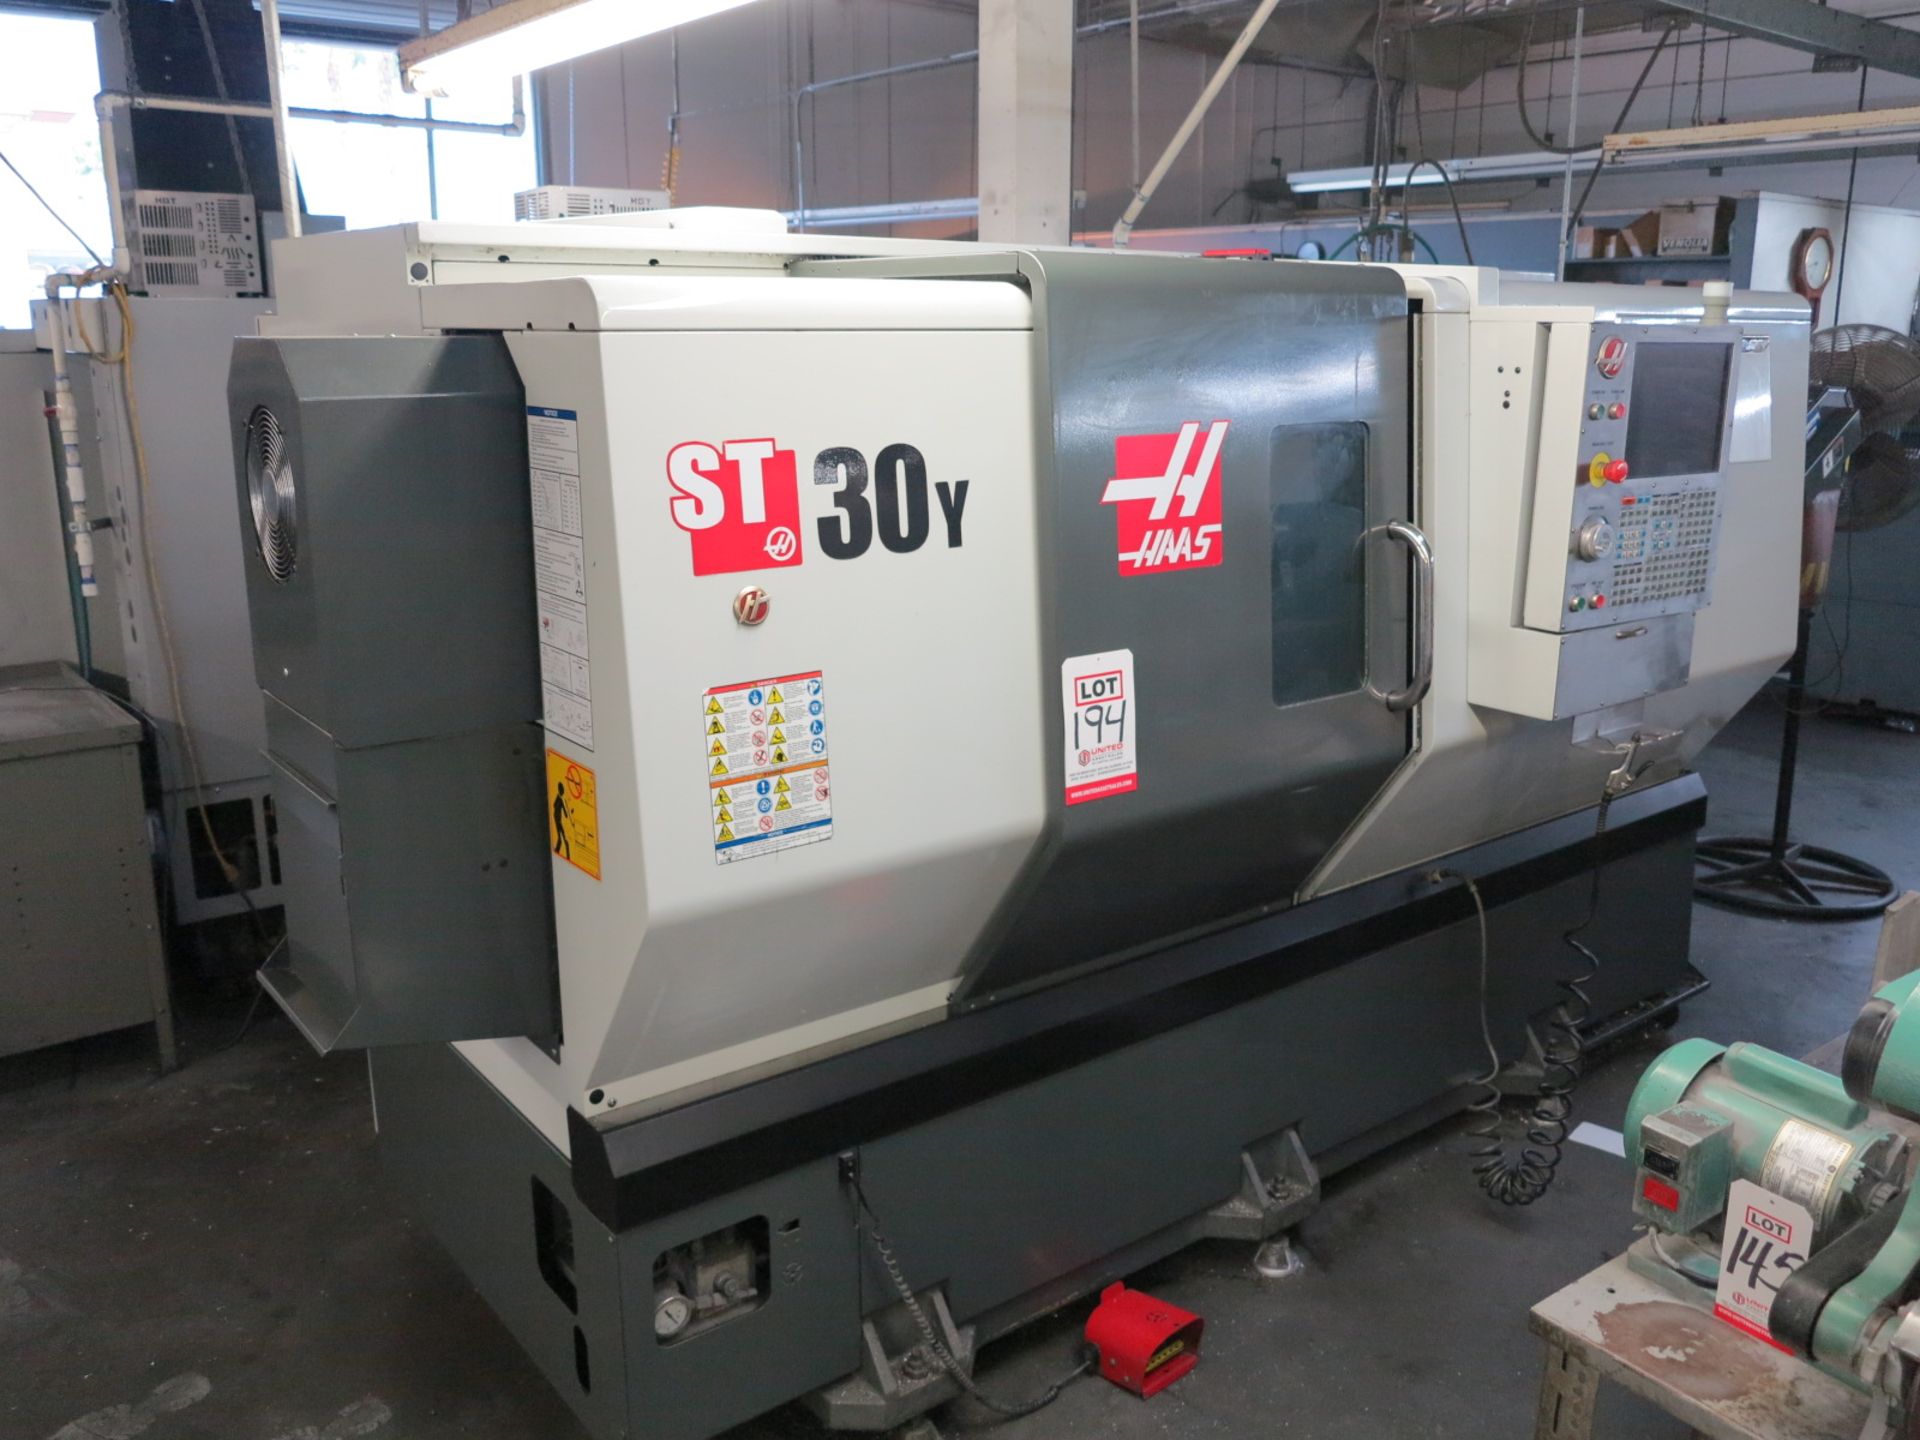 2013 HAAS ST-30Y CNC TURNING CENTER, S/N 3095014, FULL C AXIS, LIVE MILLING/DRILLING, Y AXIS - Image 2 of 14